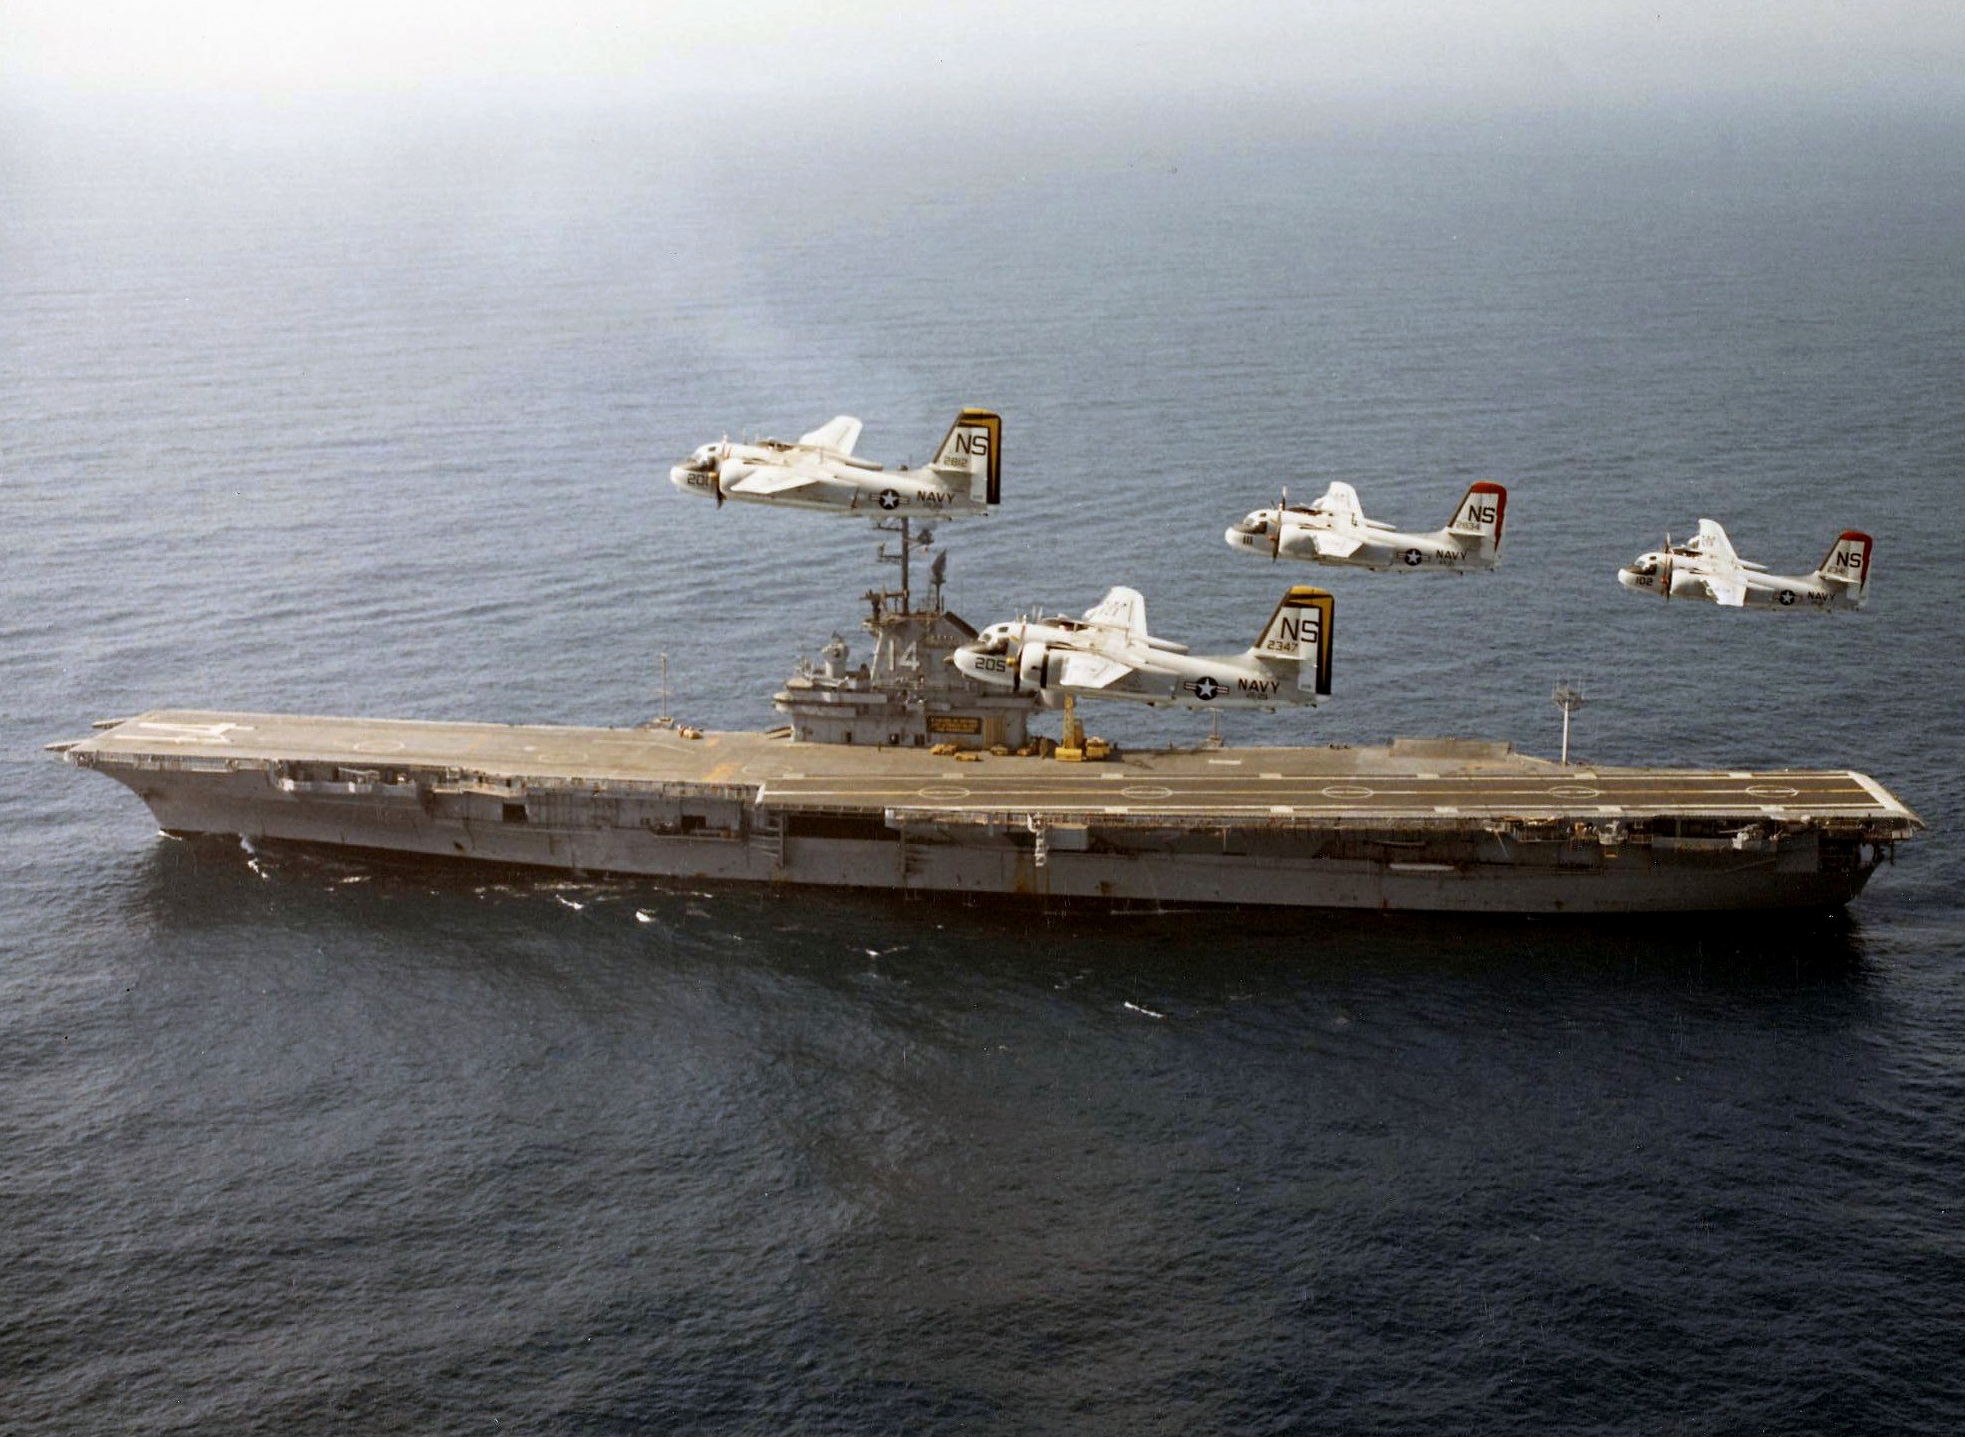 S-2E Tracker aircraft of US Navy squadrons VS-21 and VS-29 in flight over USS Ticonderoga, off San Diego, California, United States, 26 Jun 1970